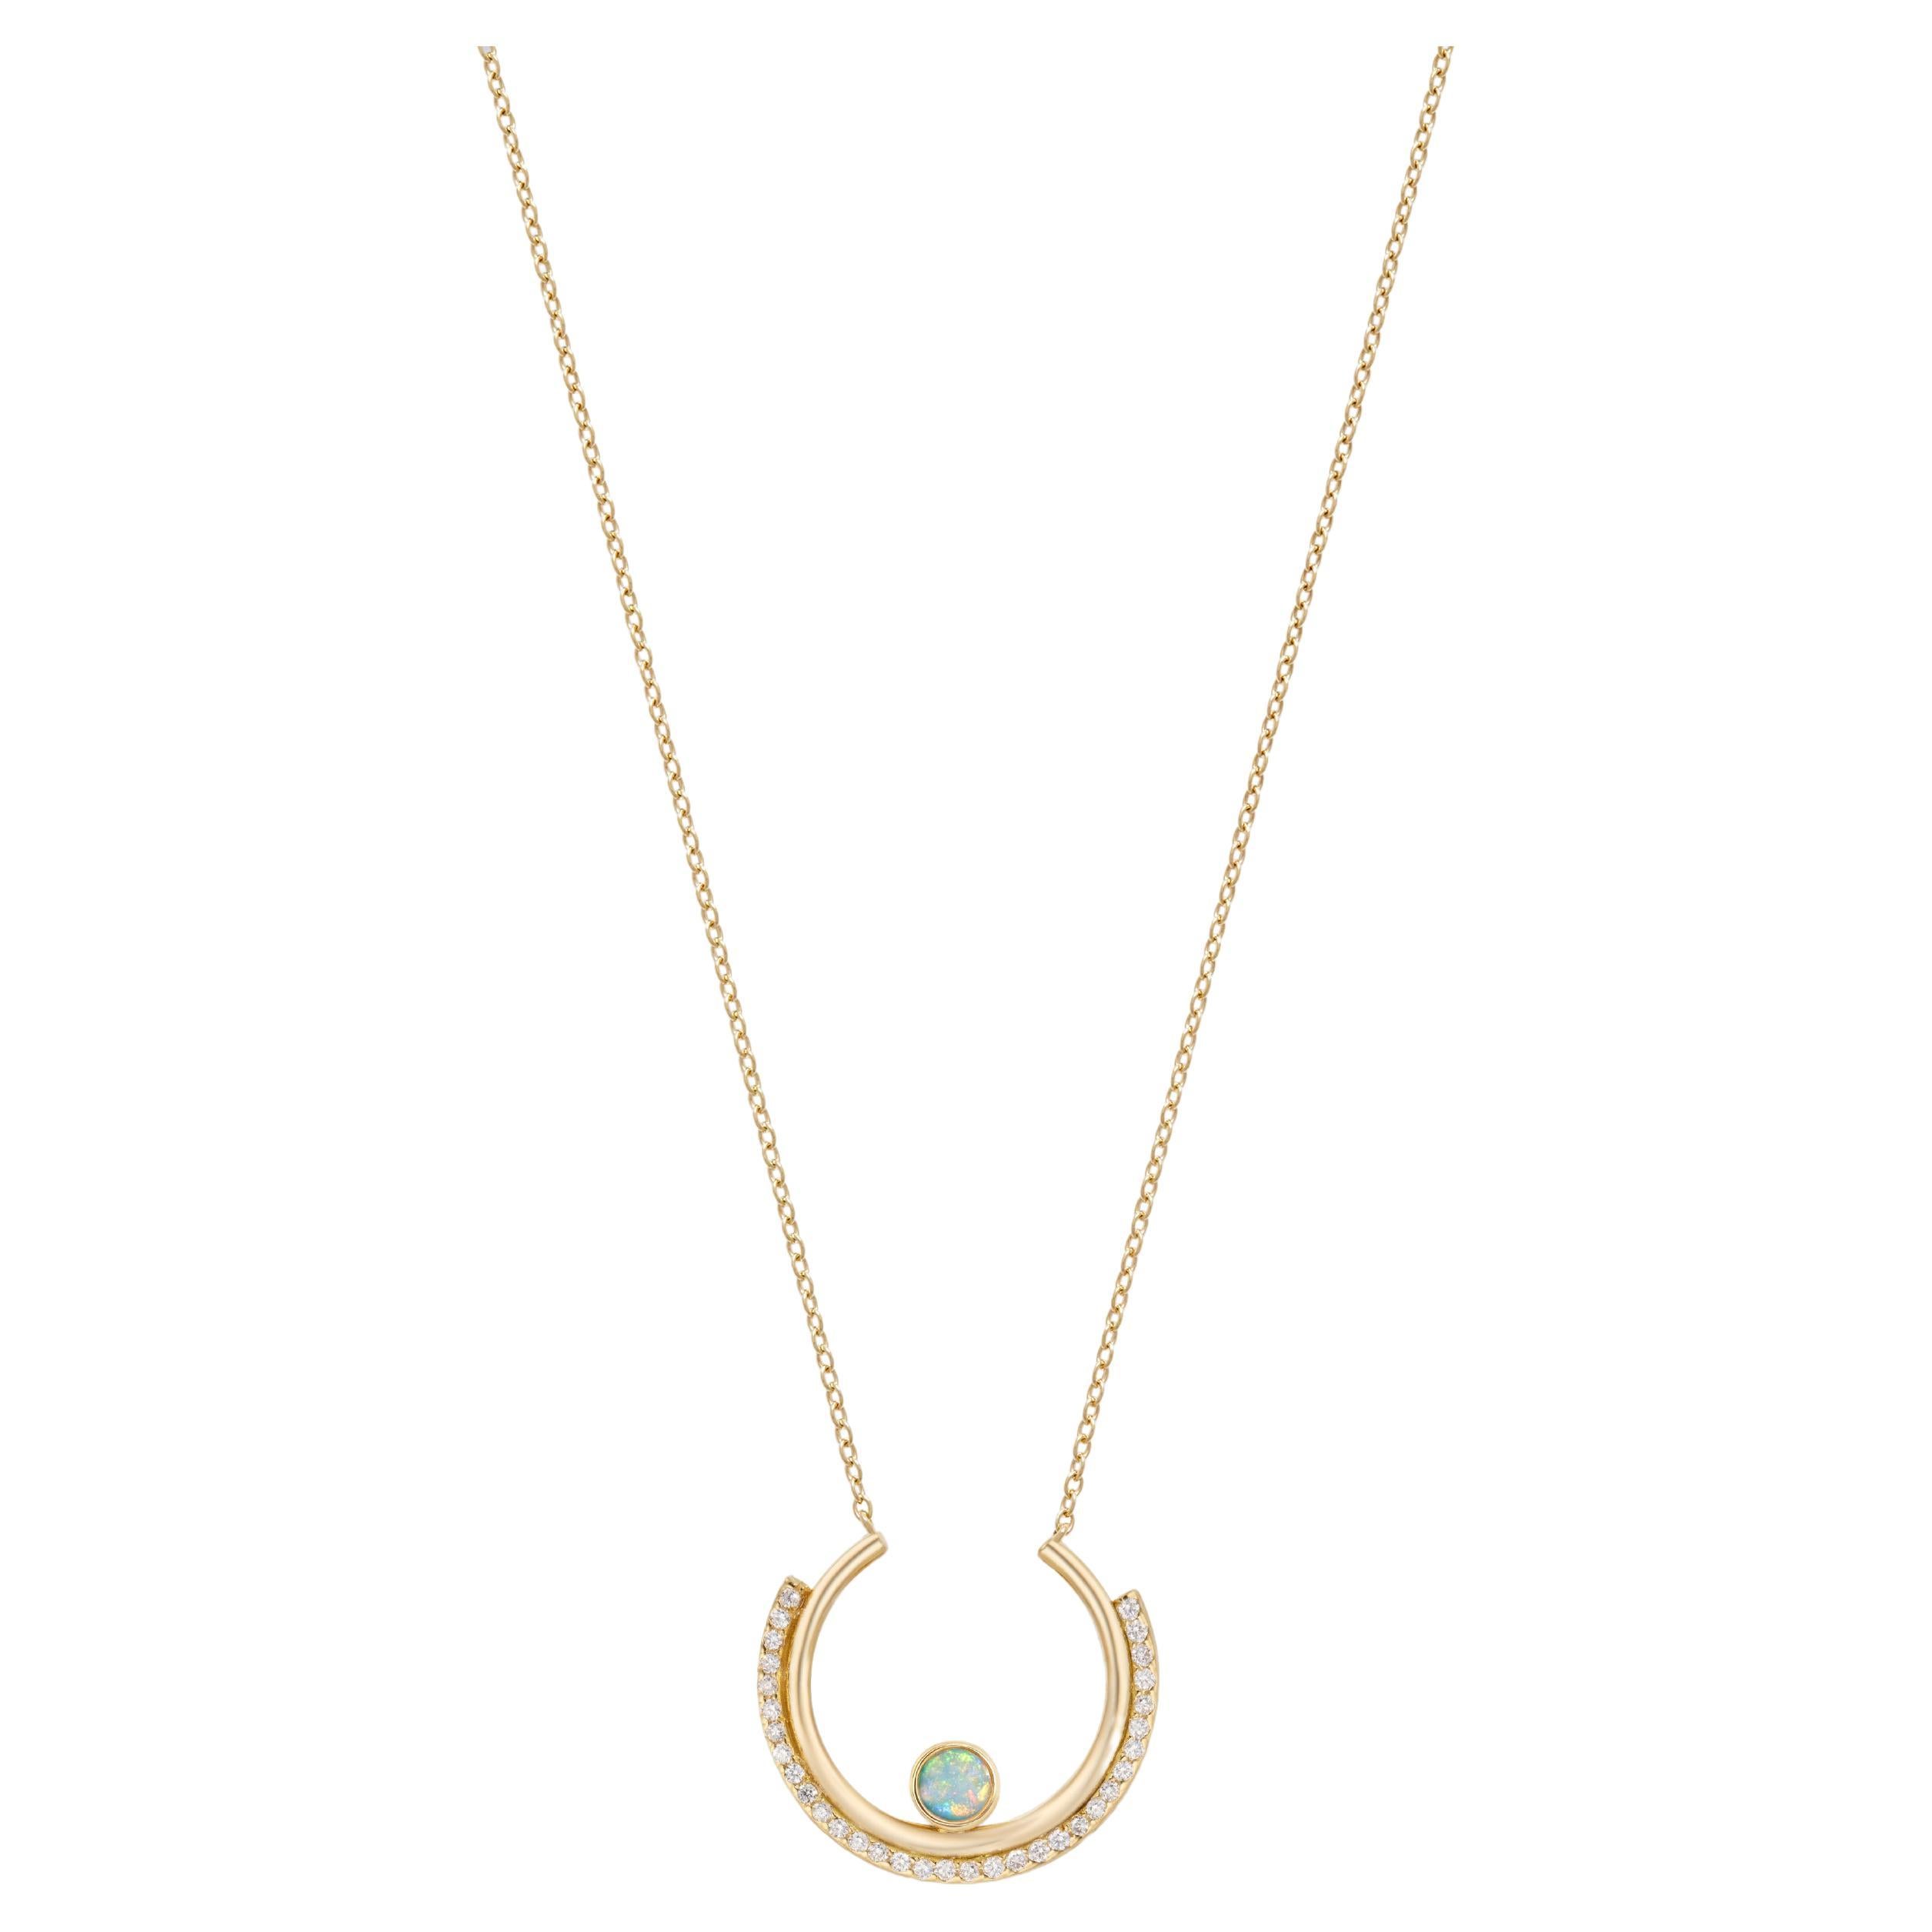 Casey Perez Gold Arc Necklace with Opal and Brilliant Cut Diamonds on Gold Chain